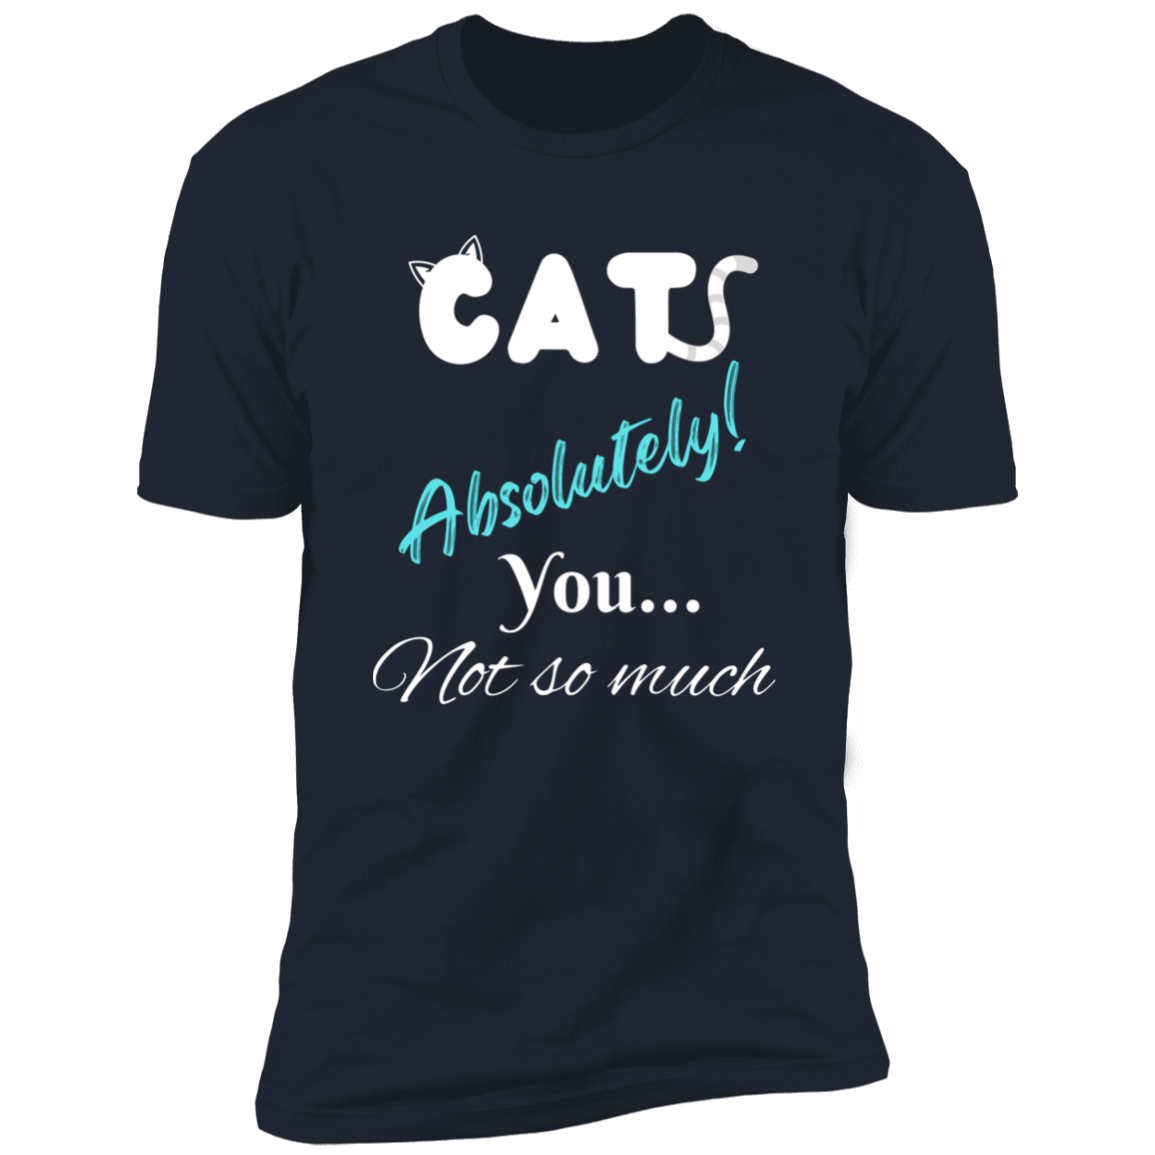 Cats Absolutely You Not So Much T-shirt, Cat Shirt for humans , in navy blue